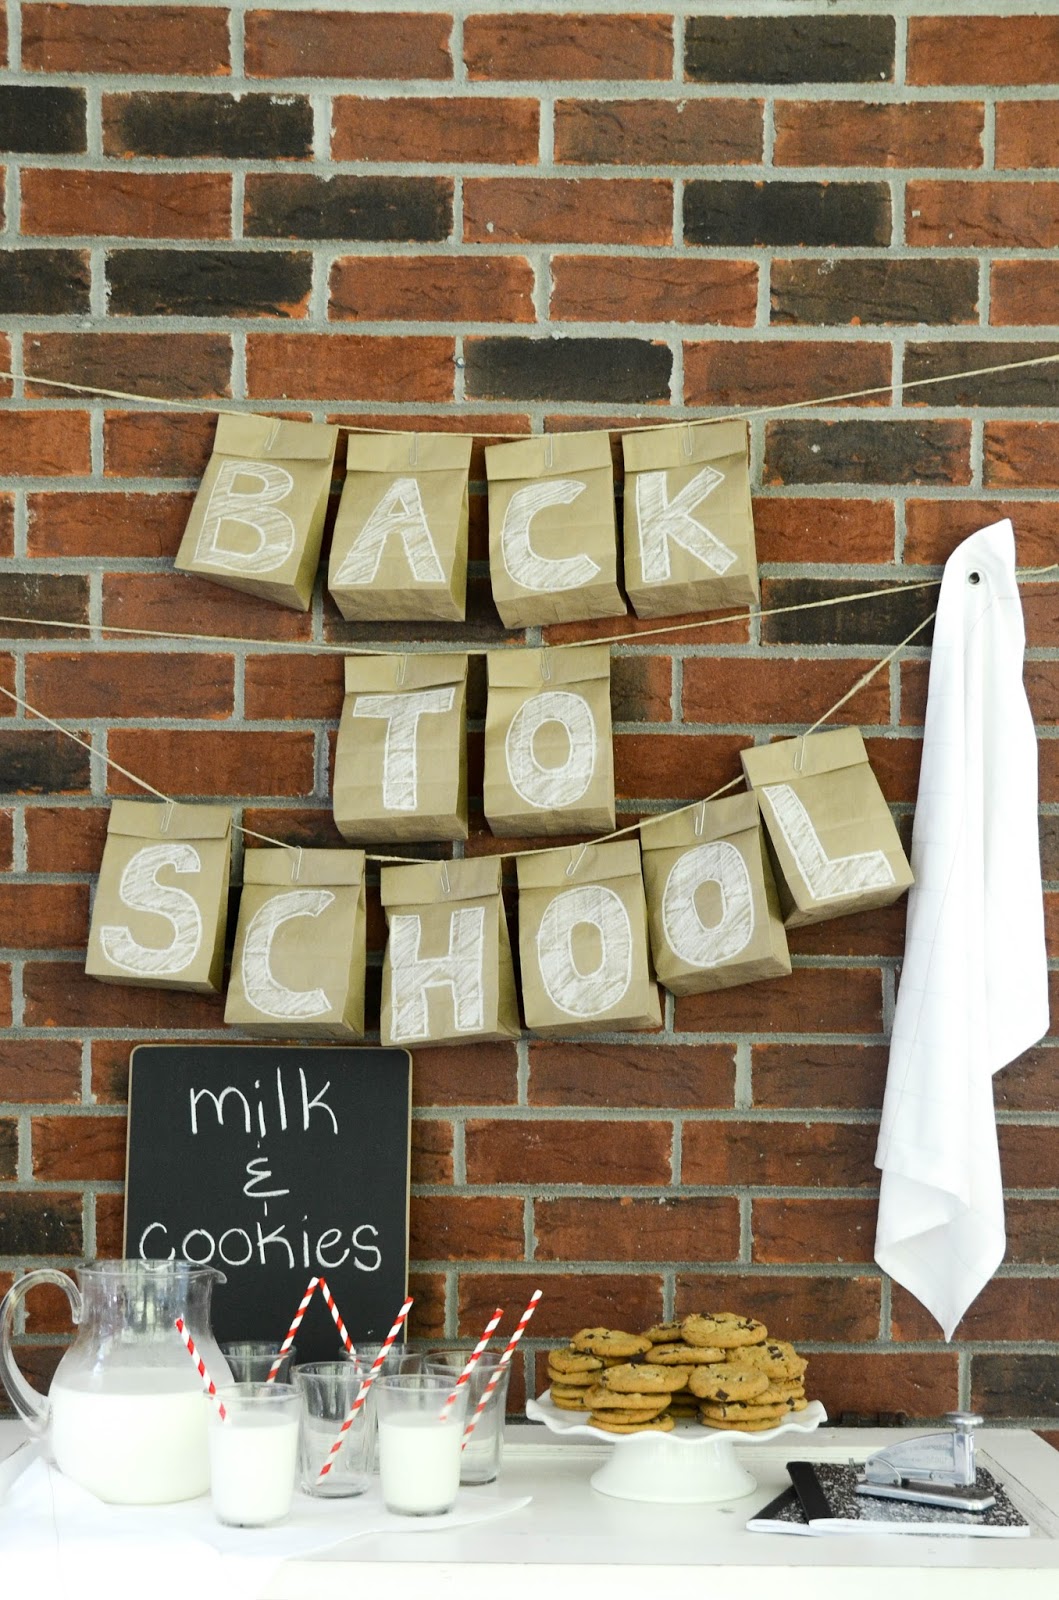 25 Back to School Traditions. Get your kids excited about school. Bring some magic to the start of the school year with fun and easy back to school pictures, back to school breakfasts, back to school parites, and other fun back to school ideas. 